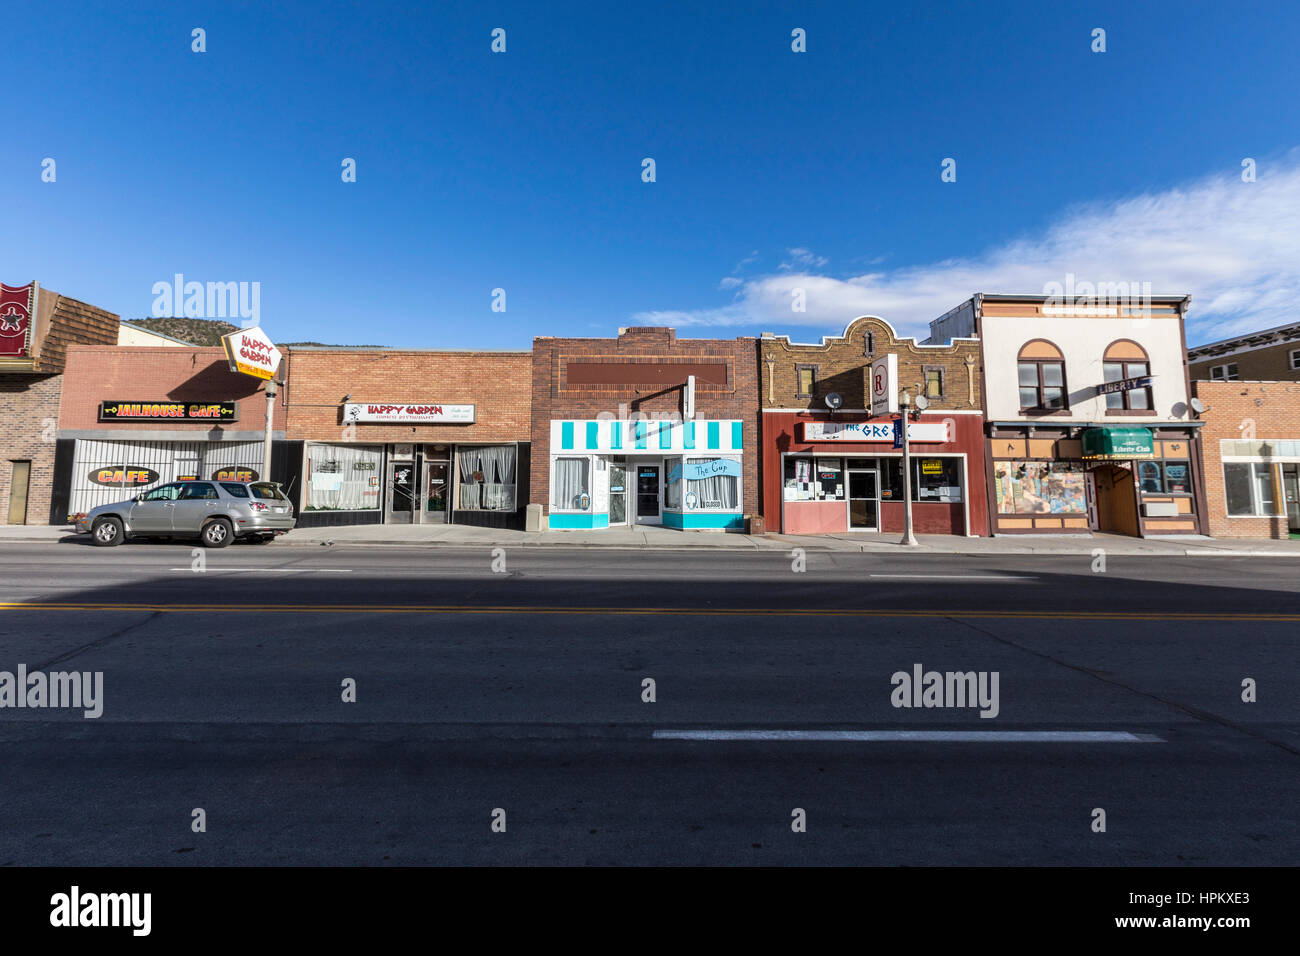 Ely, Nevada, USA - October 16, 2016:  Vintage small town storefronts in rural Ely Nevada. Stock Photo